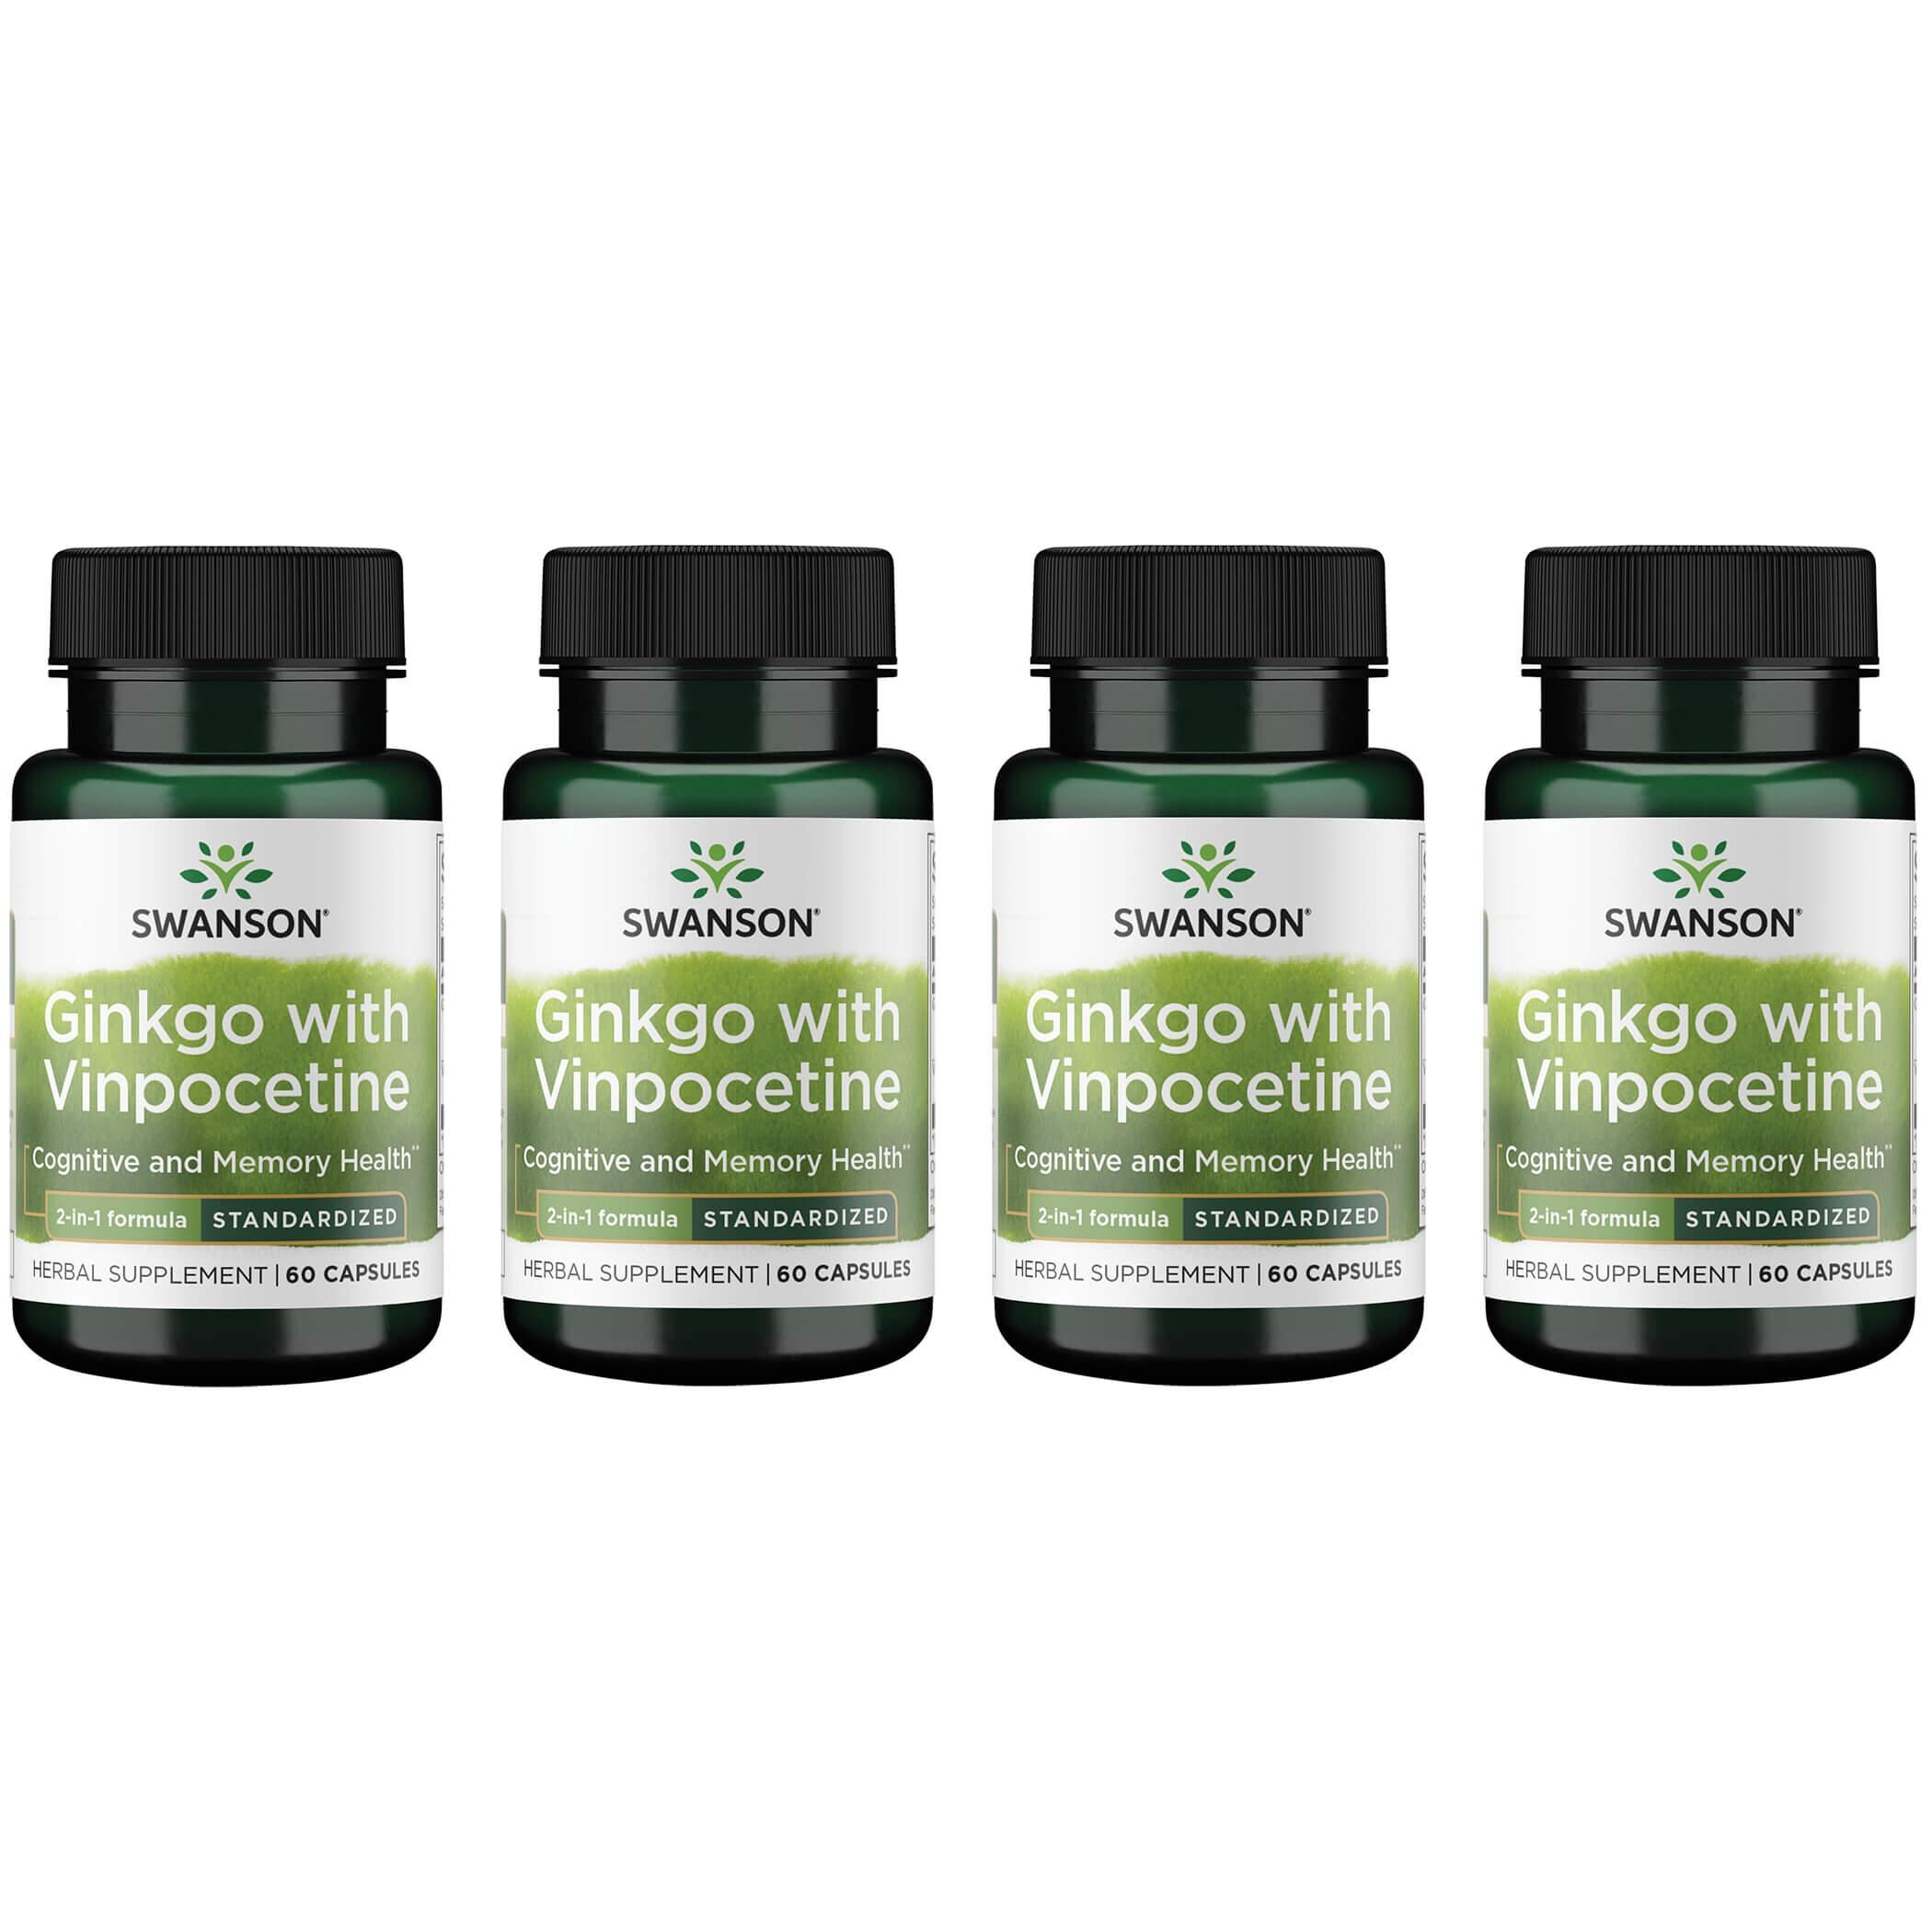 Swanson Superior Herbs Ginkgo with Vinpocetine - Standardized 4 Pack Vitamin 60 Caps